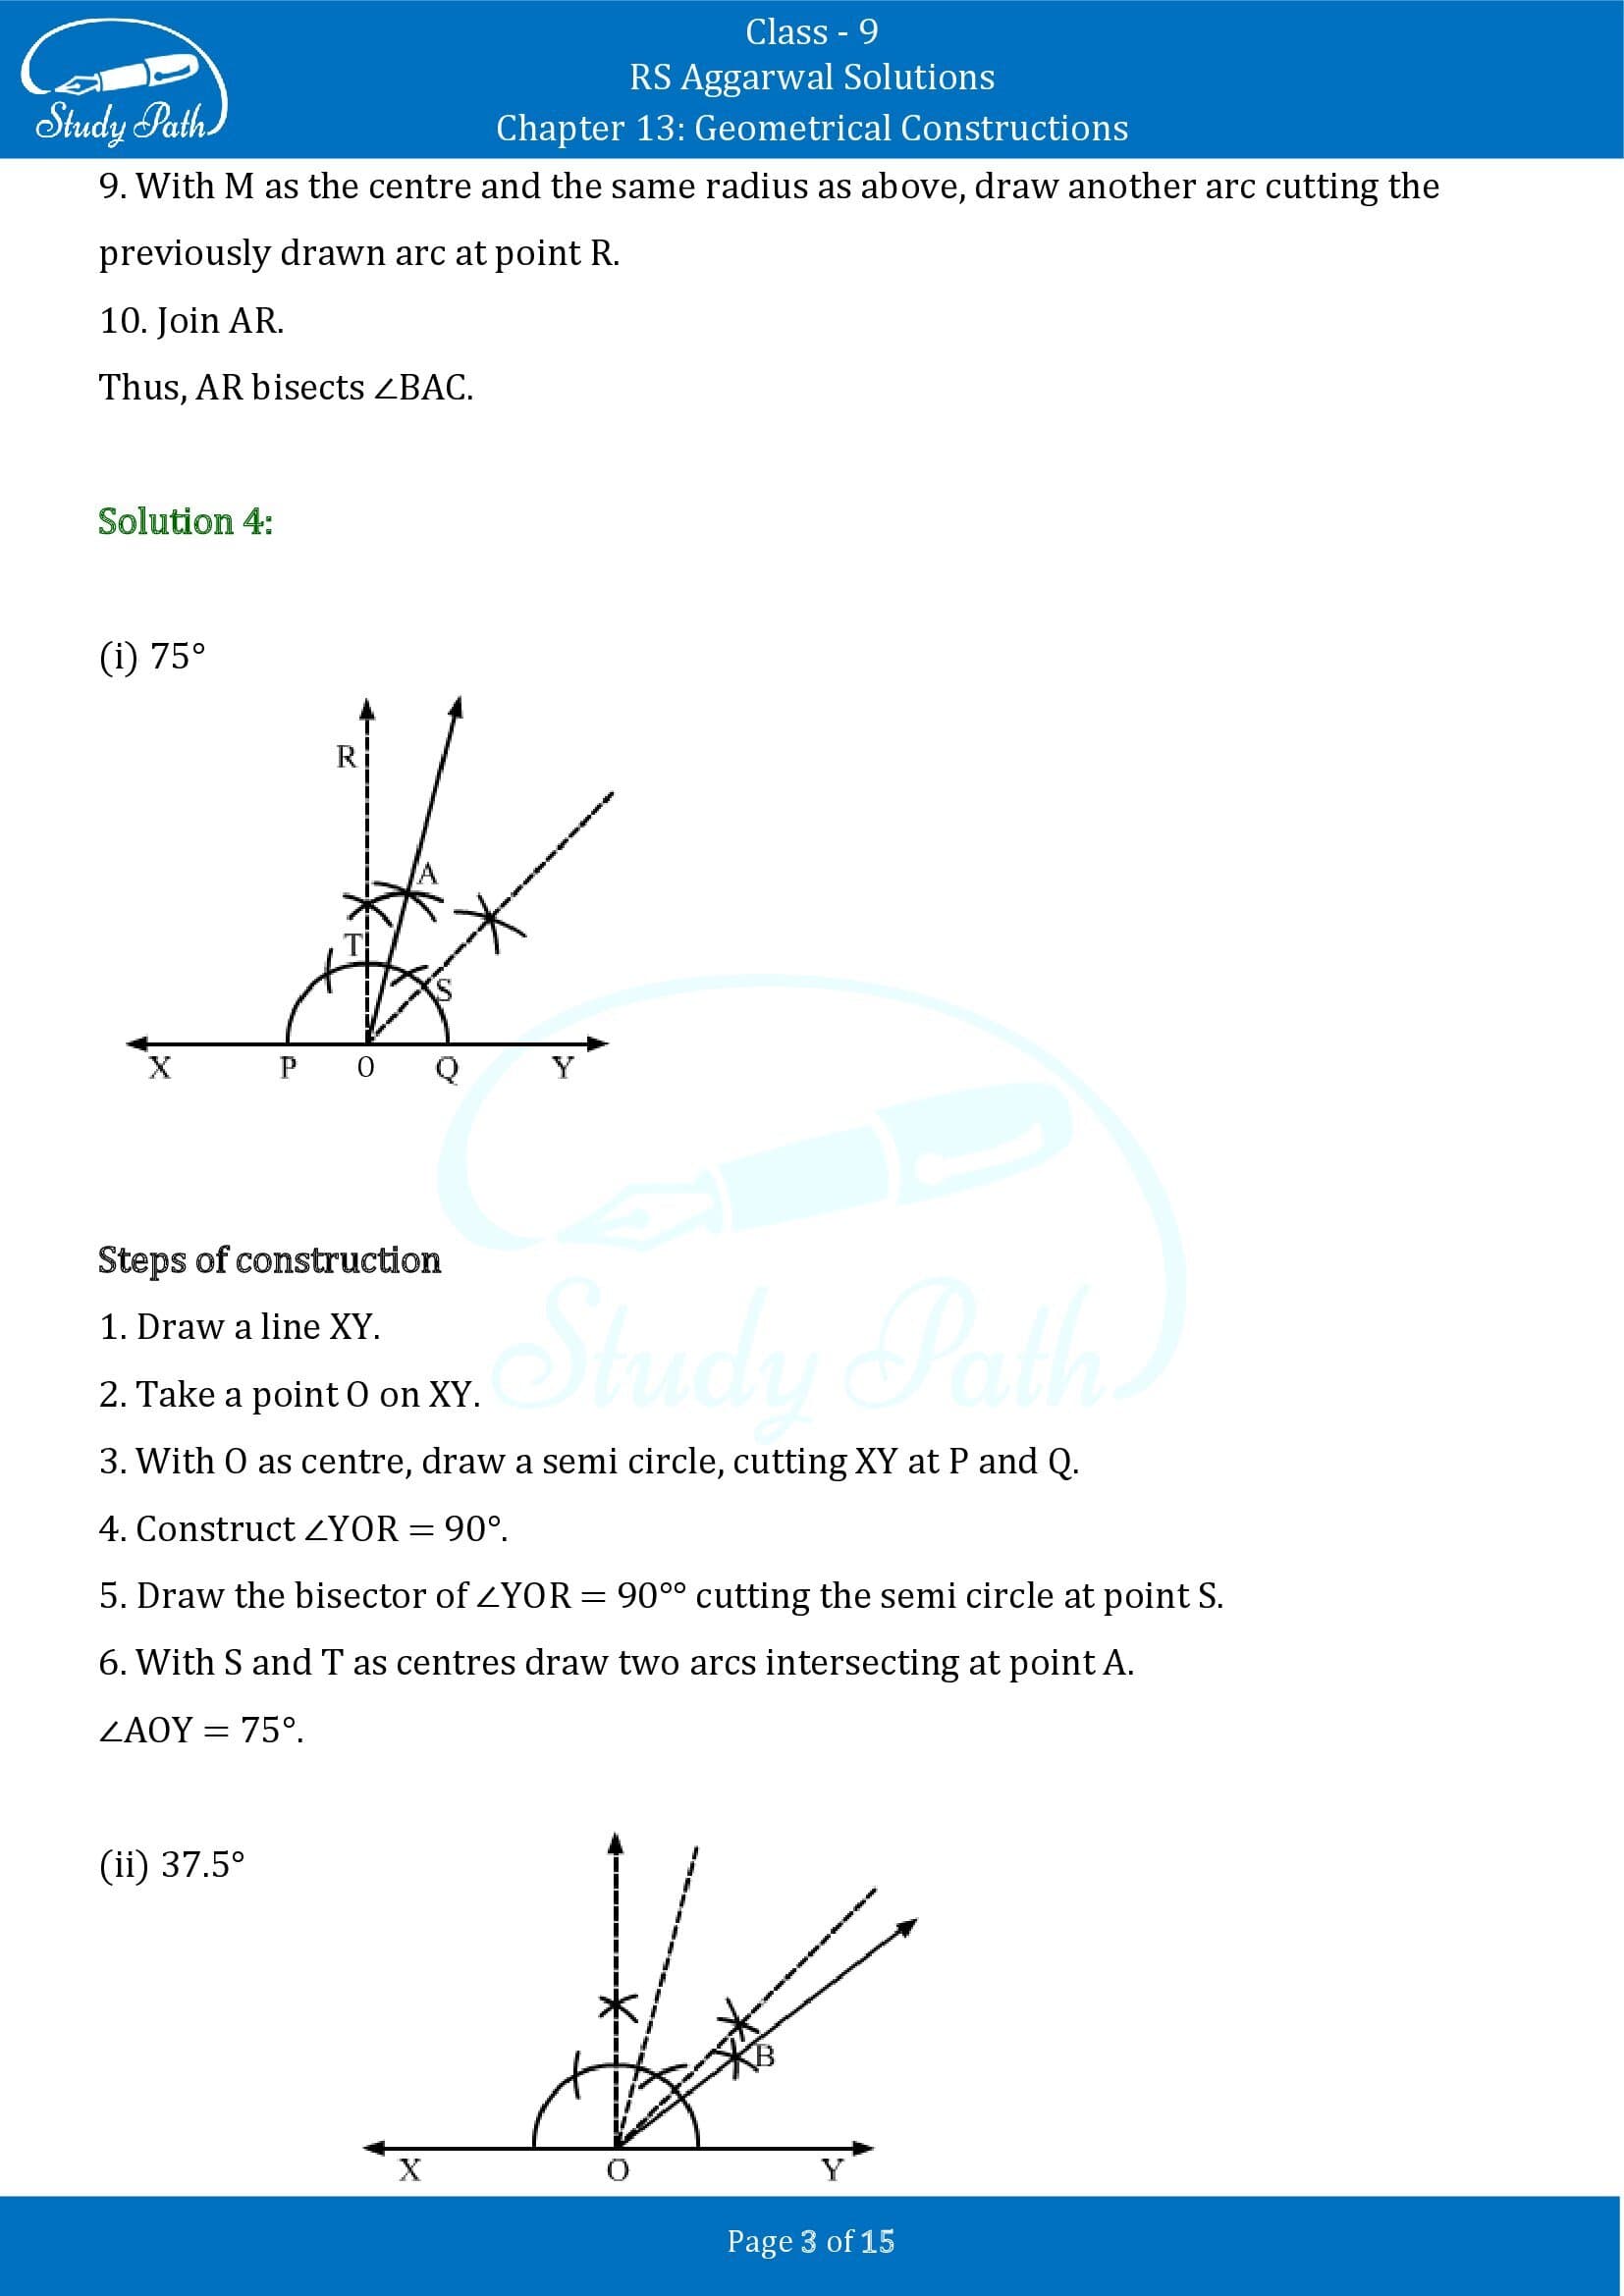 RS Aggarwal Solutions Class 9 Chapter 13 Geometrical Constructions 03